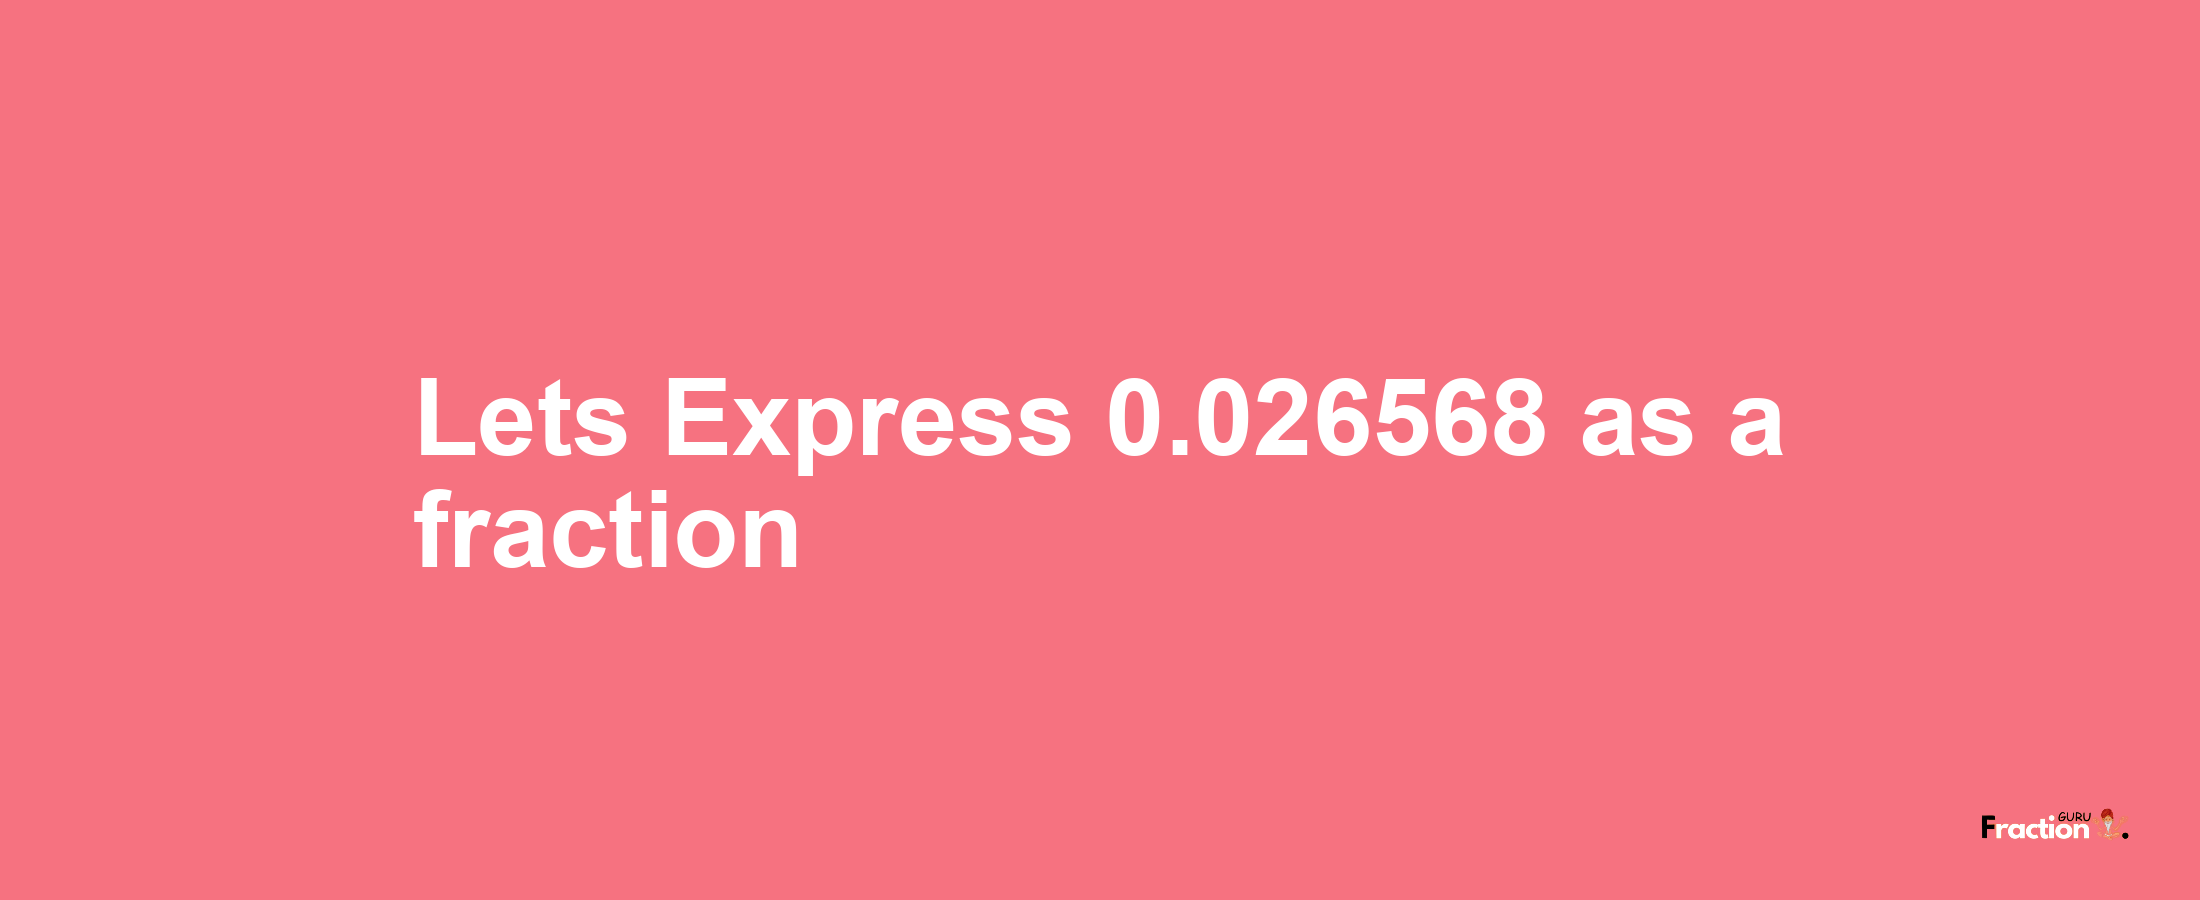 Lets Express 0.026568 as afraction